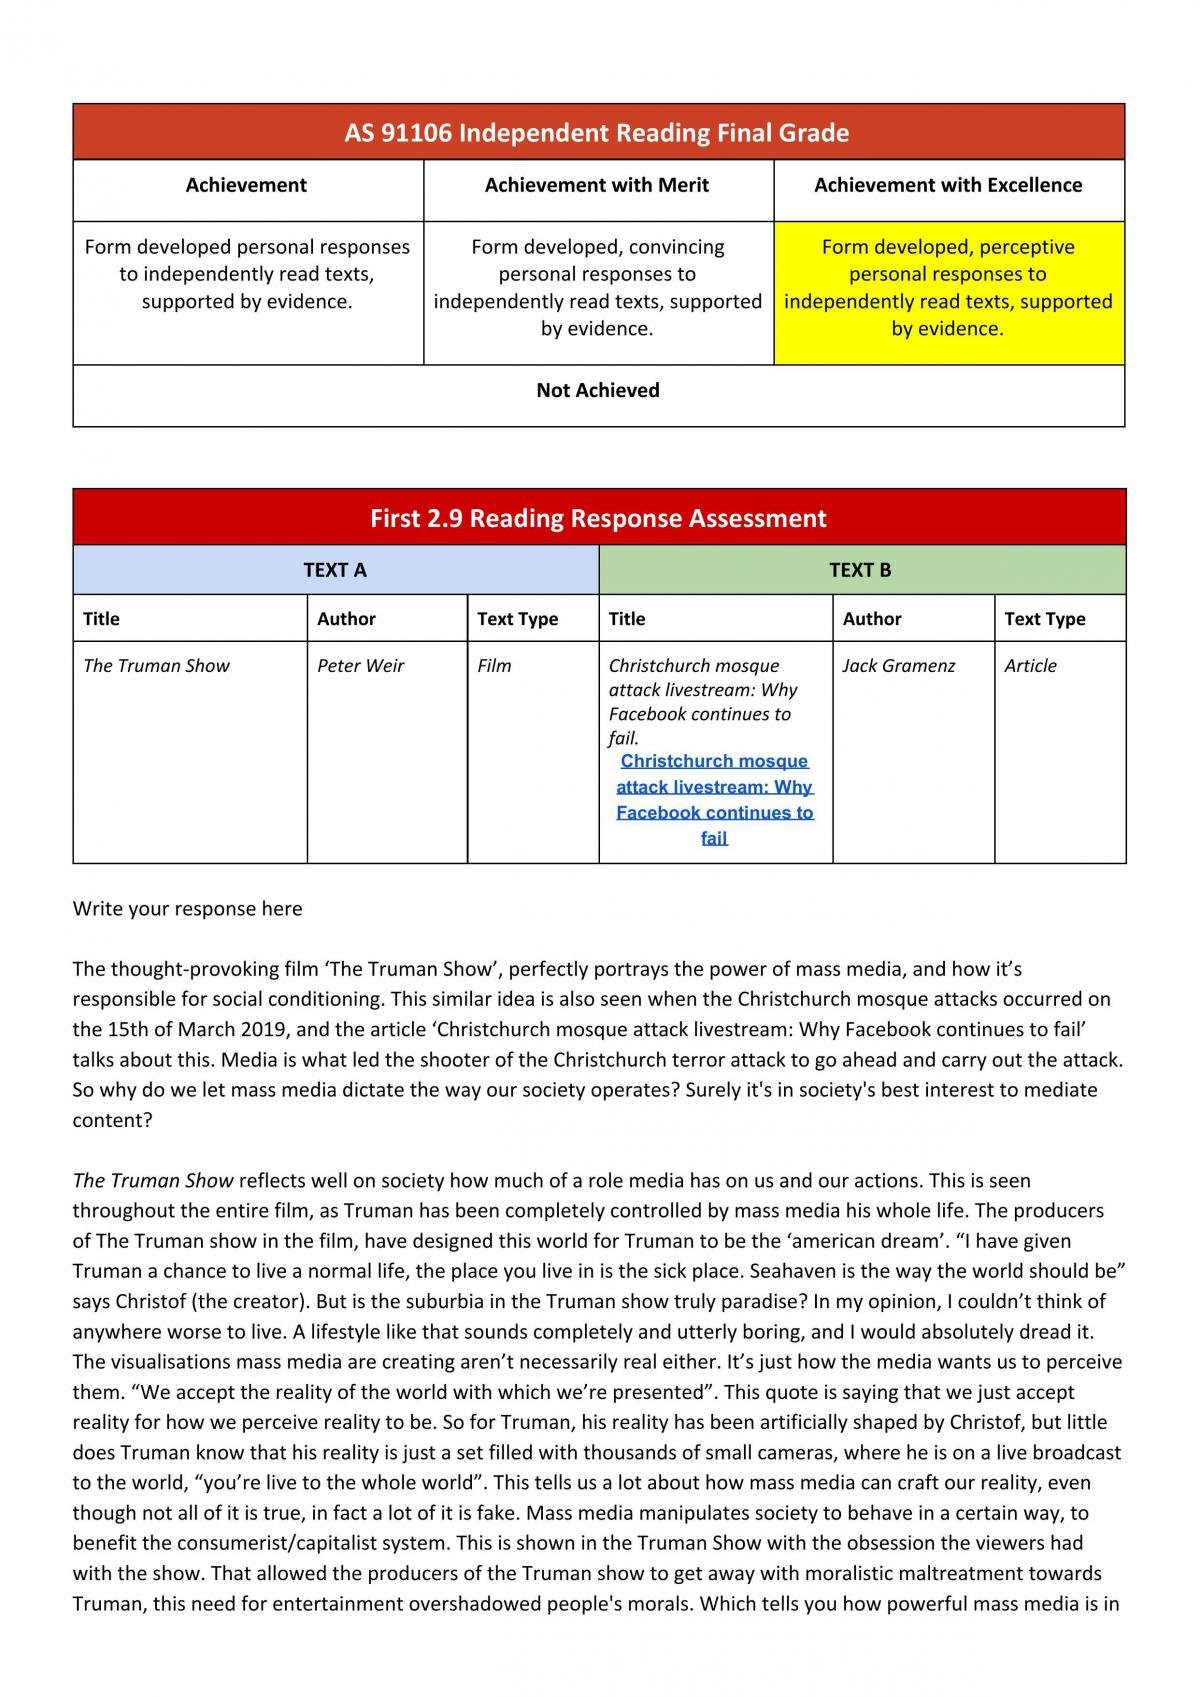 2.9 Dual Response Assessment - Excellence - Page 1